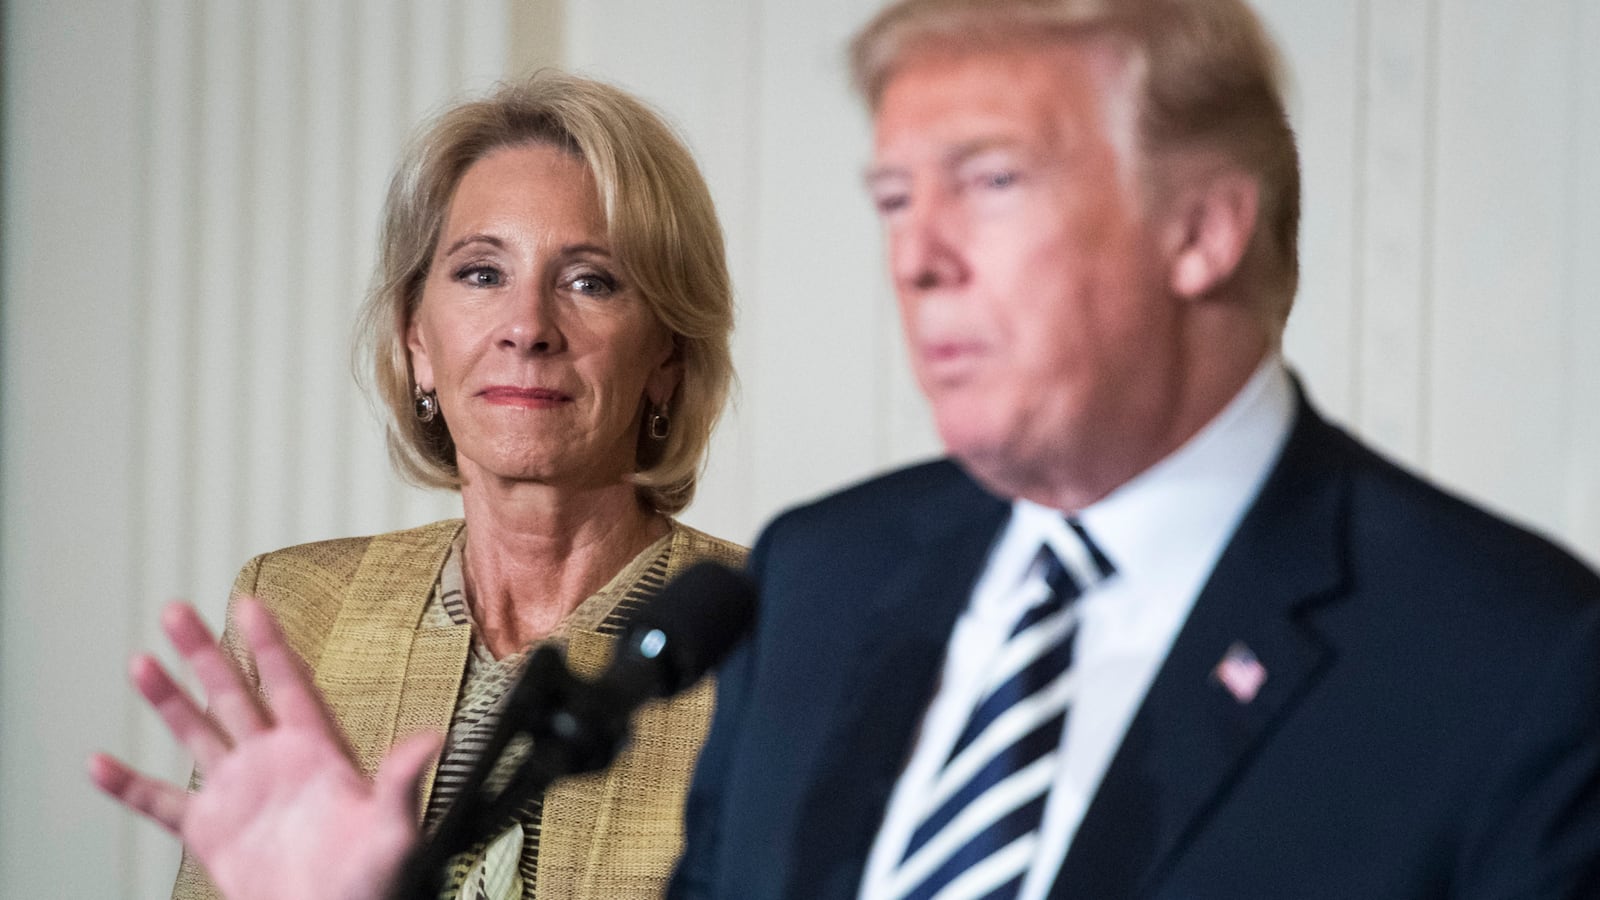 WASHINGTON, DC - MAY 2: Secretary of Education Betsy DeVos listens as President Donald J. Trump gives remarks at the National Teacher of the Year reception at the White House on May 02, 2018 in Washington, DC. (Photo by Jabin Botsford/The Washington Post via Getty Images)